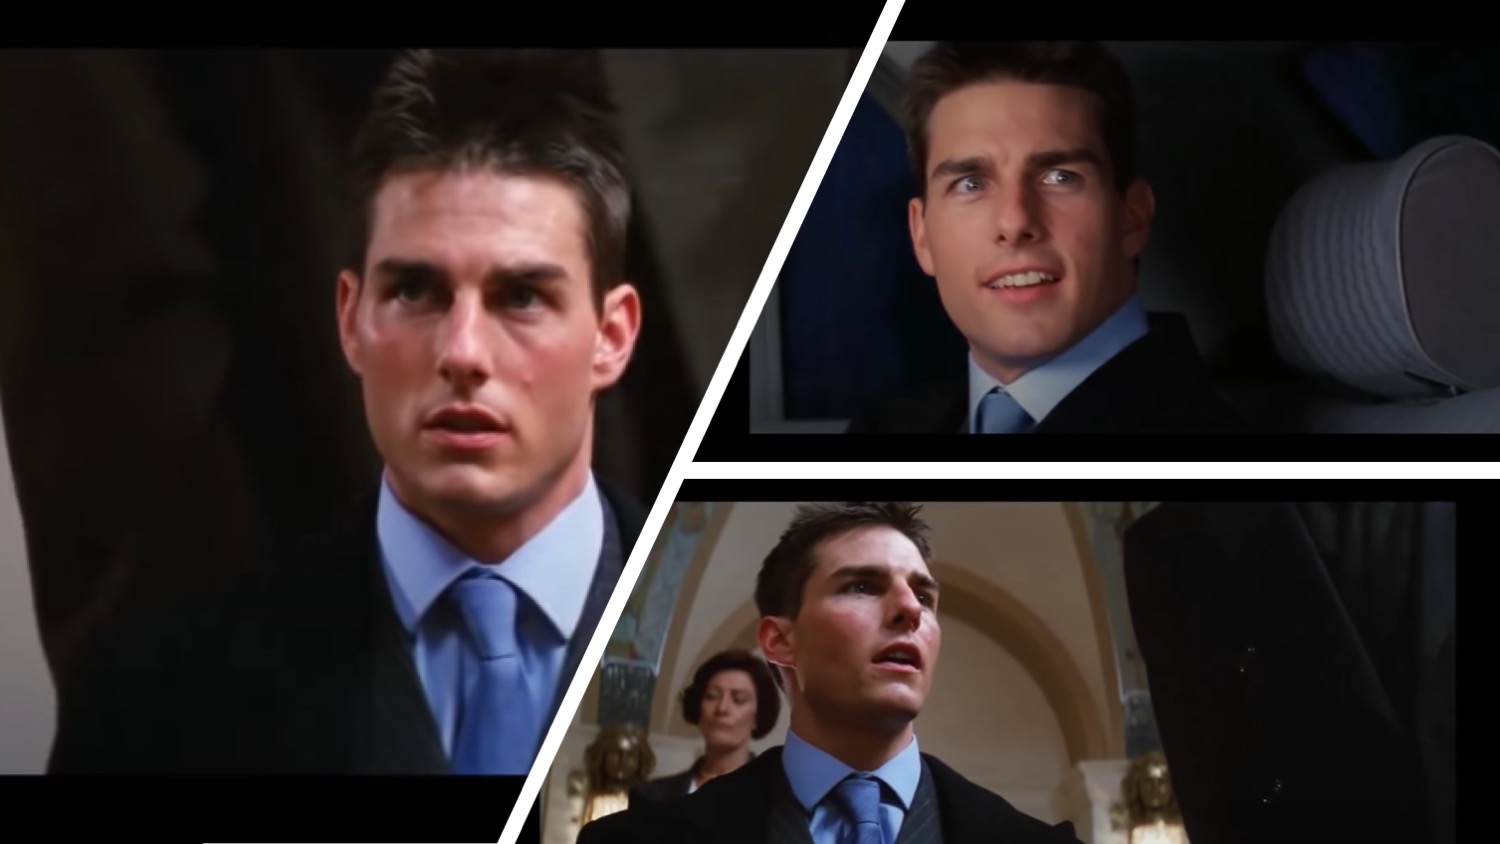 Timothy Everest chalkstripe suit Mission IMpossible Max scene